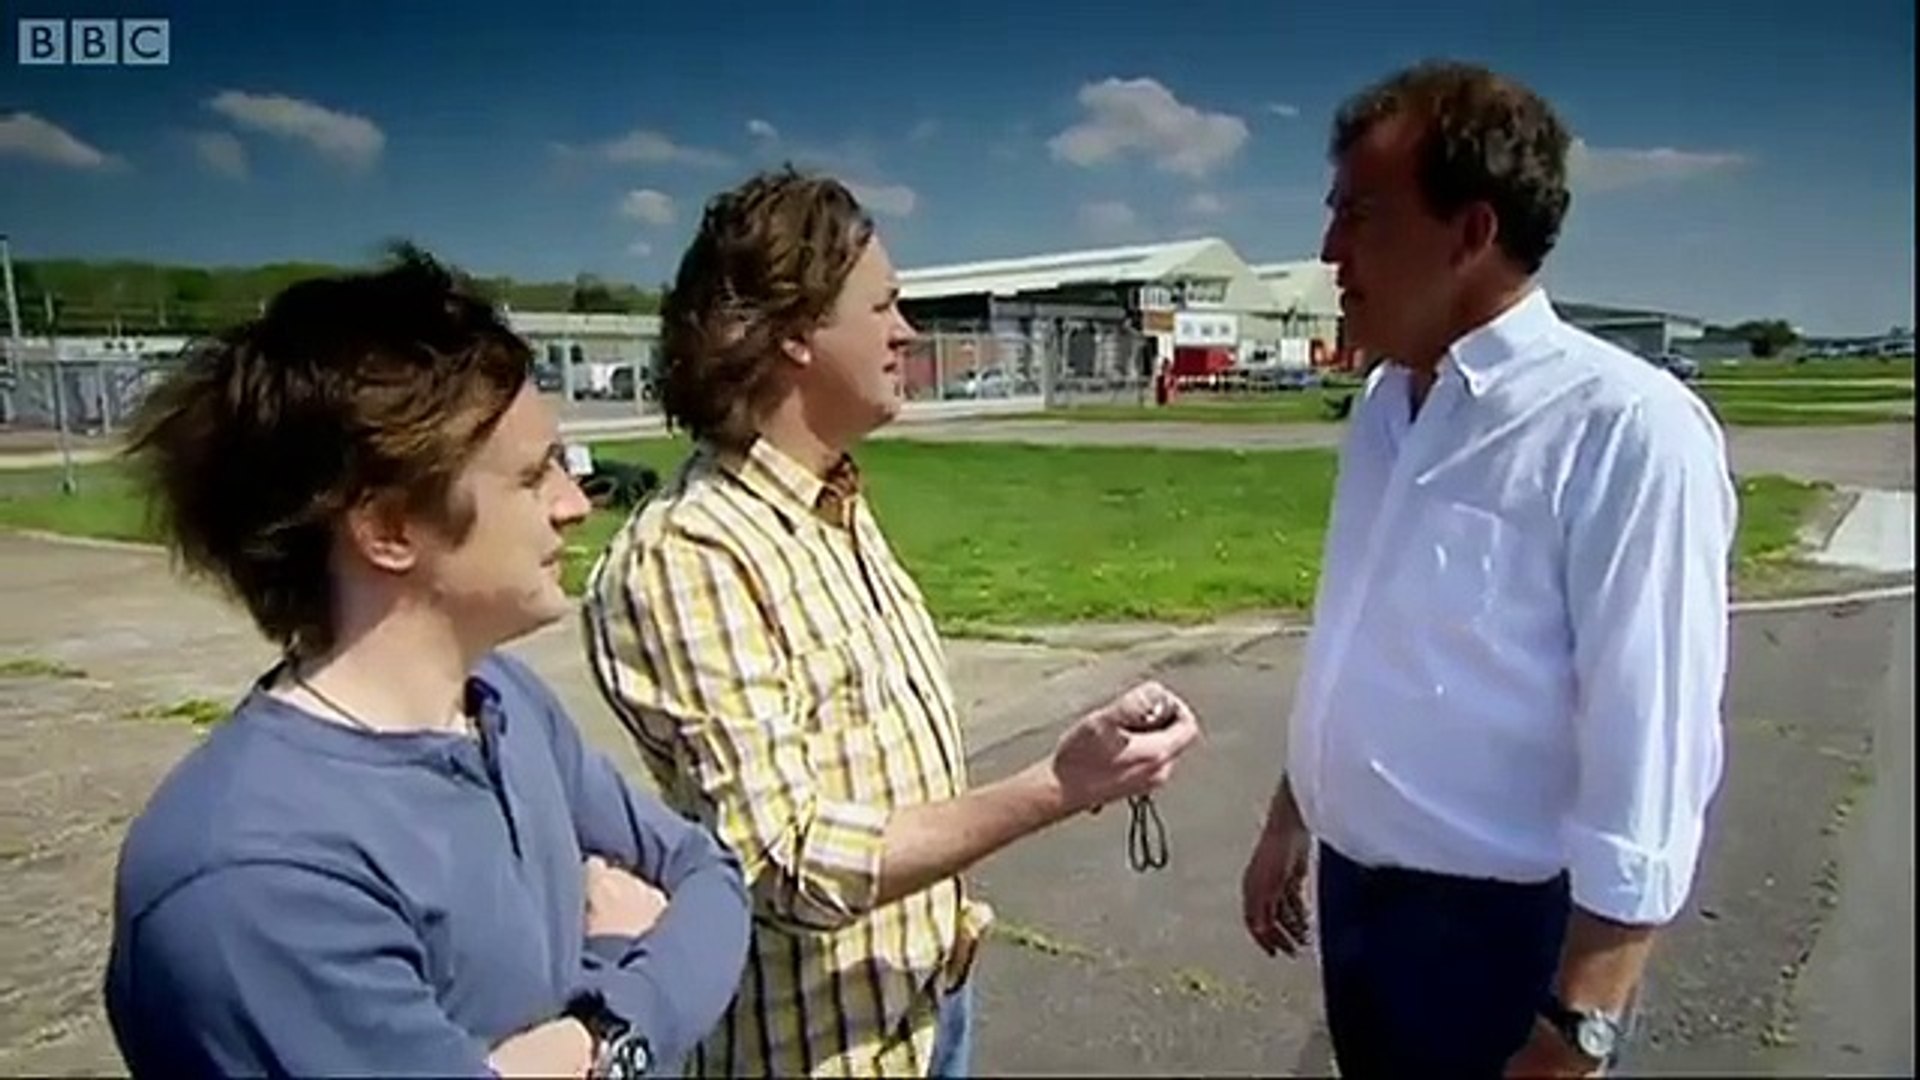 aktivering Patronise krater Police Car Challenge Part 1 (HQ) Top Gear BBC - video Dailymotion